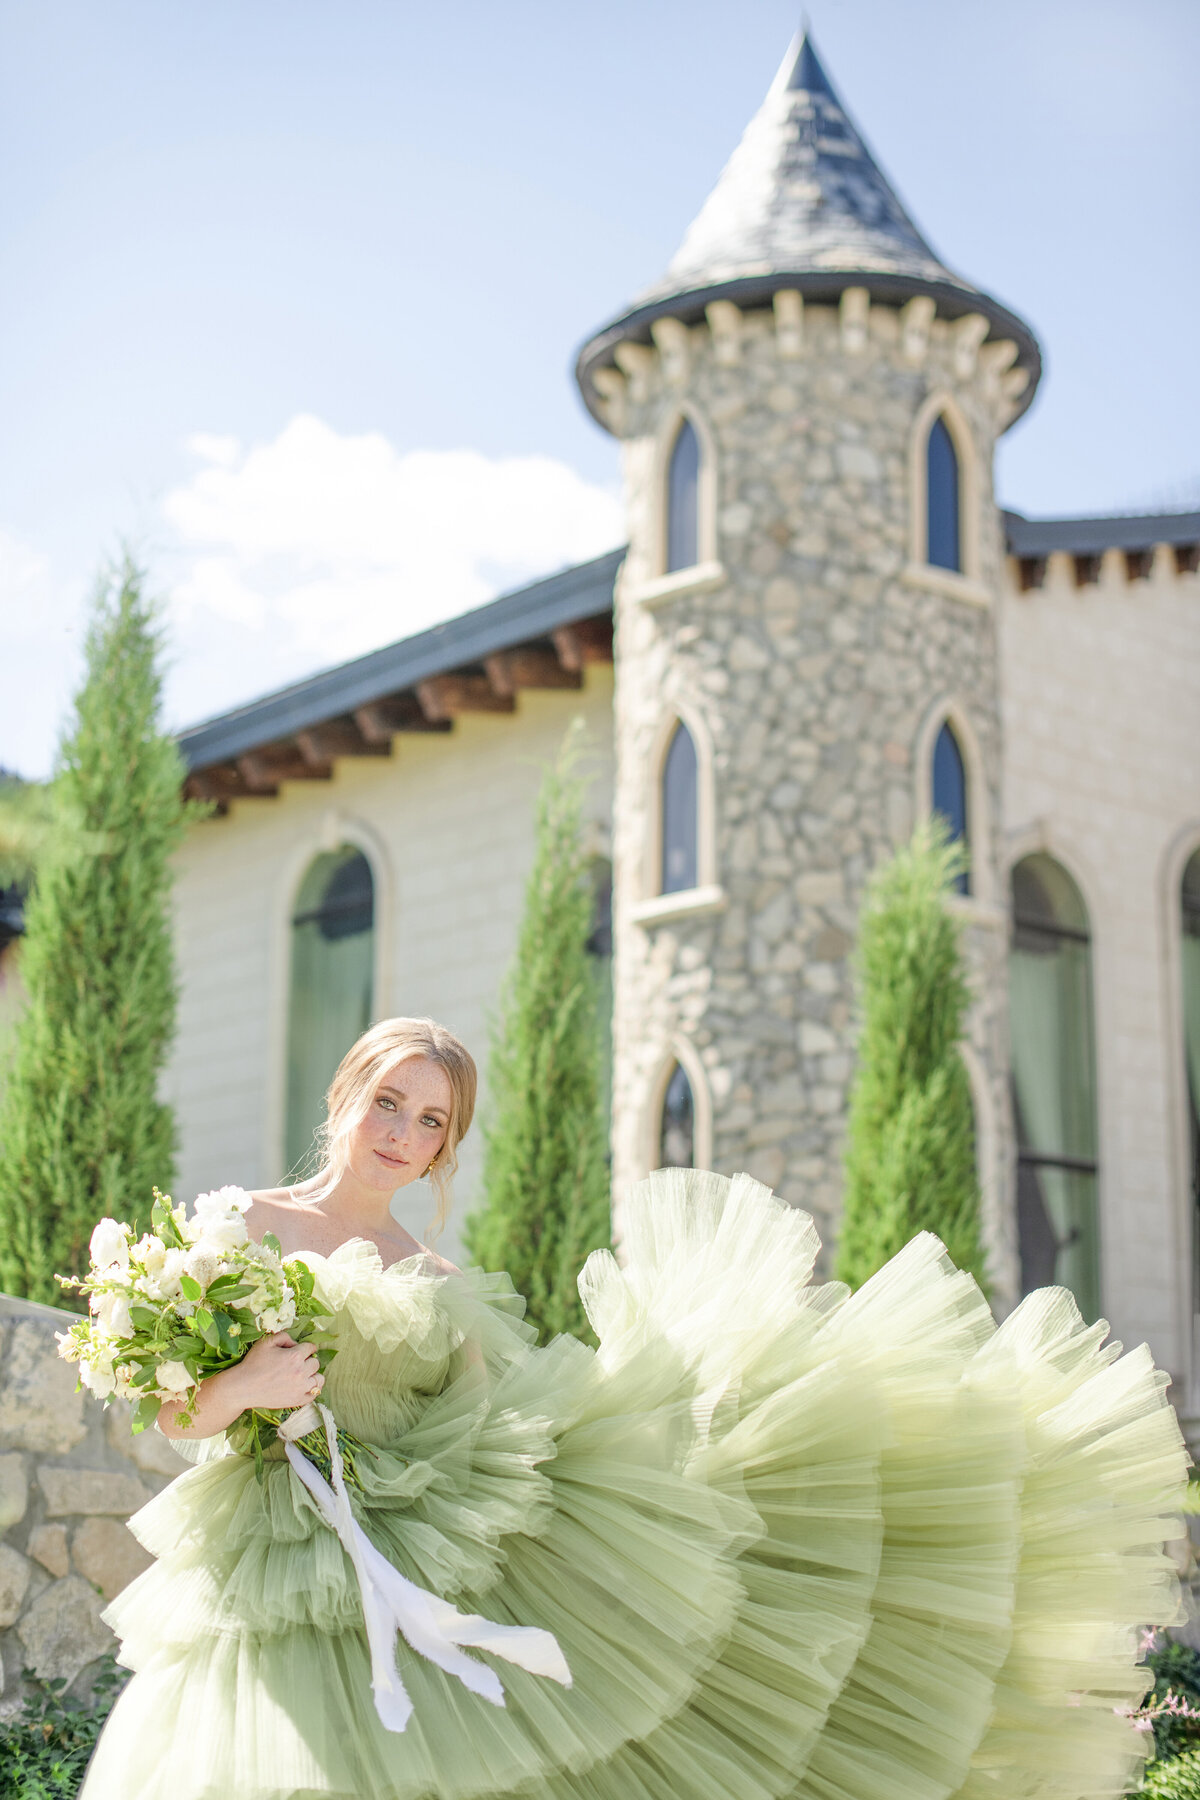 Bridal Editorial with Styled Shoots Across America at Wadley Farms.